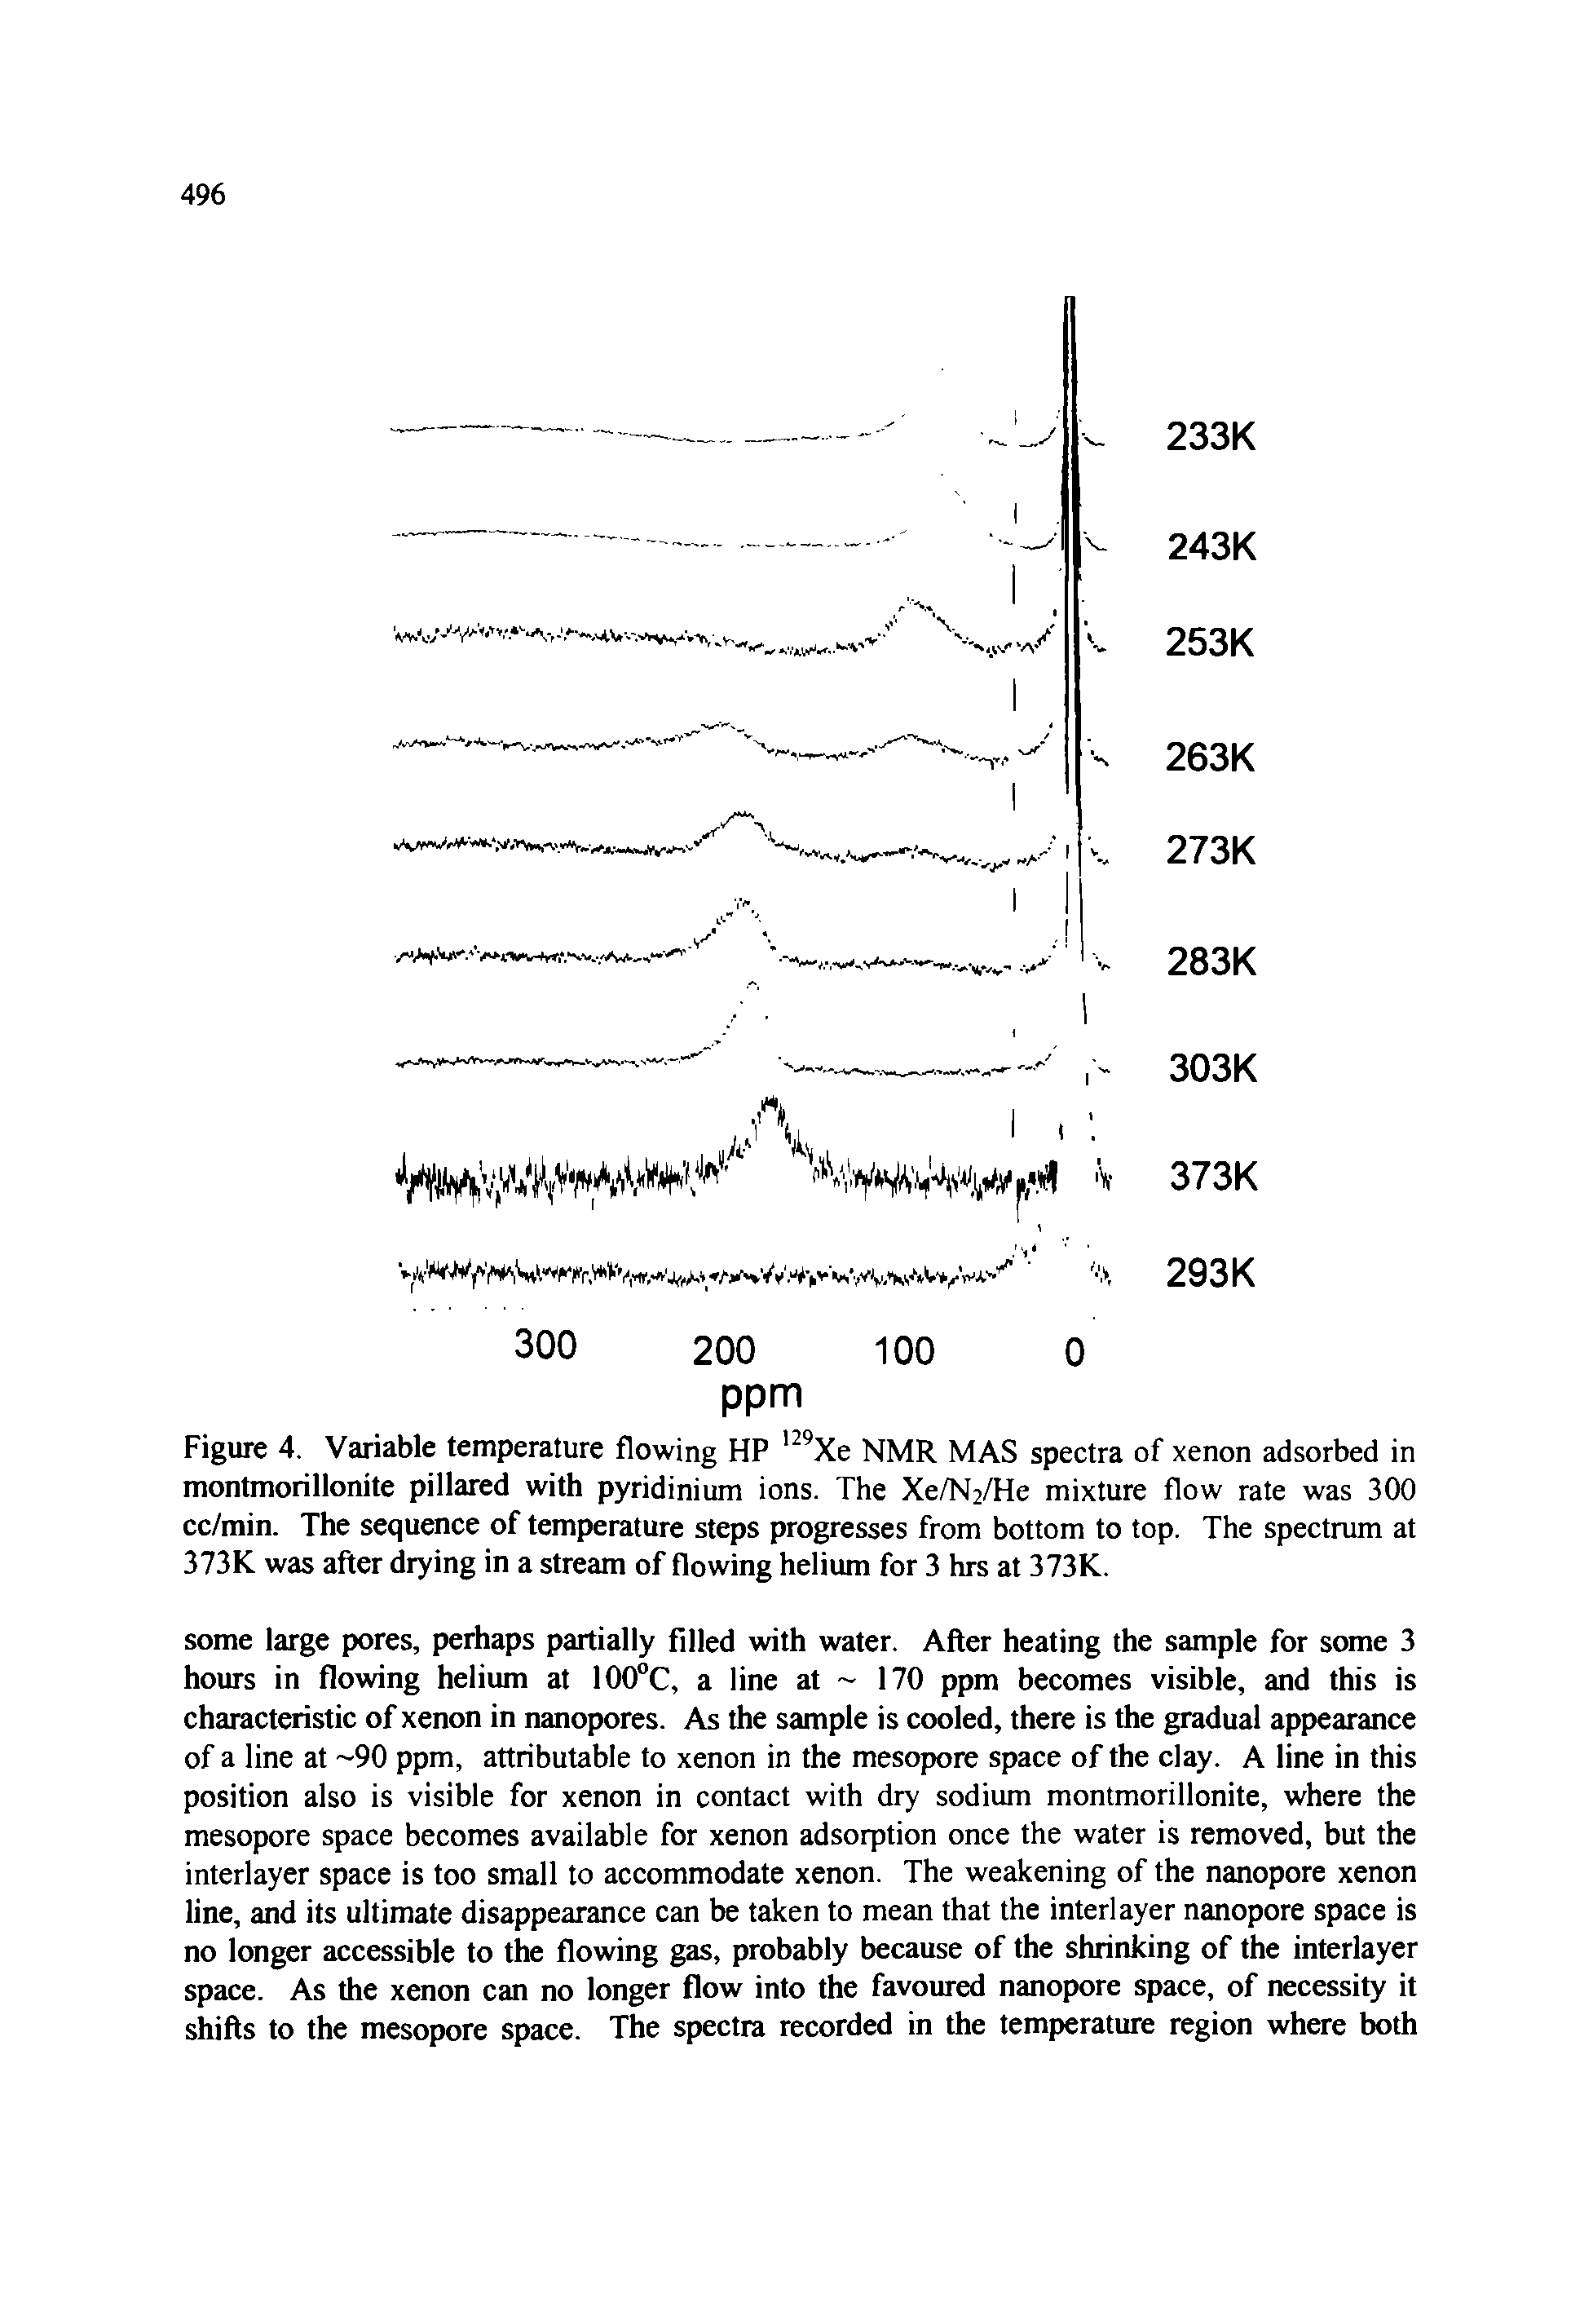 Figure 4. Variable temperature flowing HP 129Xe NMR MAS spectra of xenon adsorbed in montmorillonite pillared with pyridinium ions. The Xe/N2/He mixture flow rate was 300 cc/min. The sequence of temperature steps progresses from bottom to top. The spectrum at 373K was after drying in a stream of flowing helium for 3 hrs at 373K.